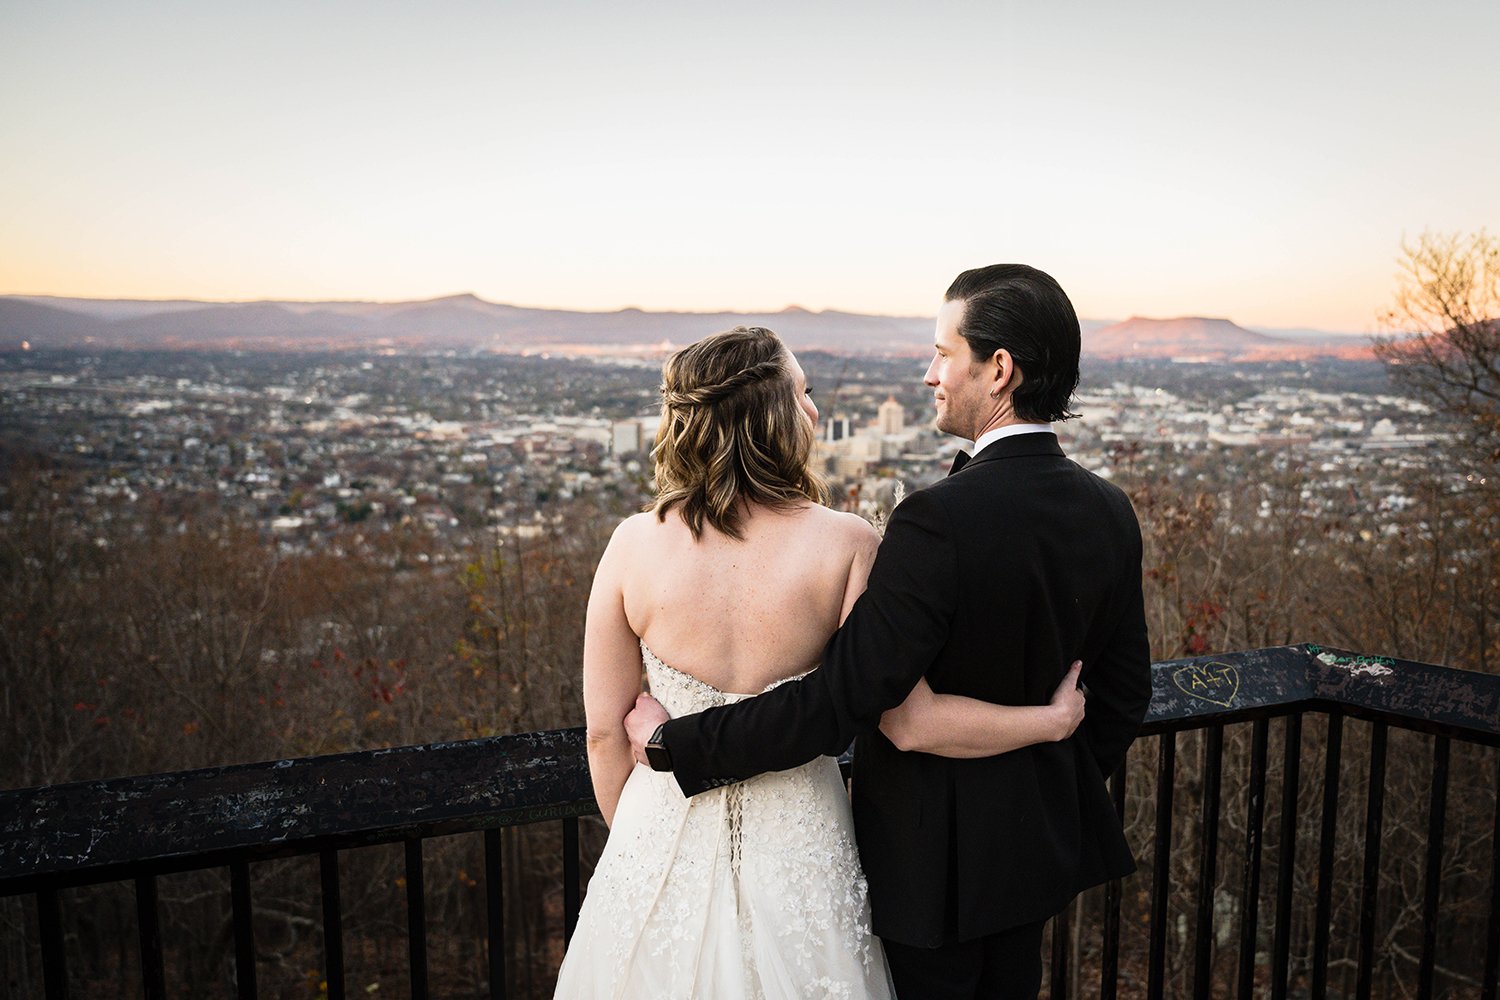 A wedding couple on their elopement day wrap their arms around one another and look at one another with the city of Roanoke and the surrounding Blue Ridge Mountains in the background.